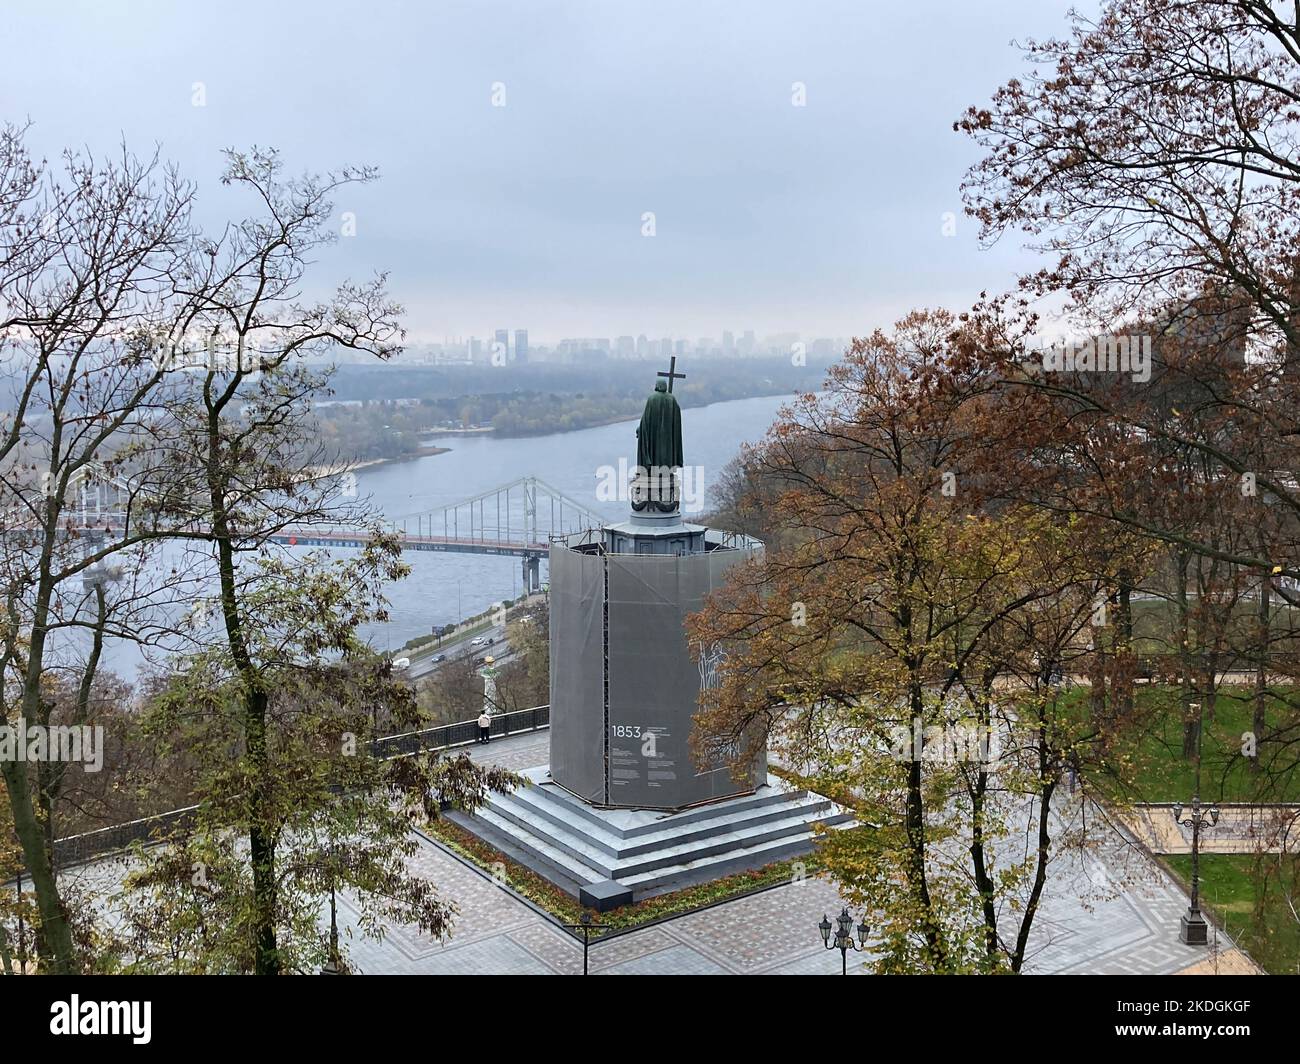 Kiew, Ukraine. 05th Nov, 2022. The monument to Prince Volodymyr I, who baptized the medieval empire of Kievan Rus in 988, looks over the Dnipro River. Credit: Friedemann Kohler/dpa/Alamy Live News Stock Photo